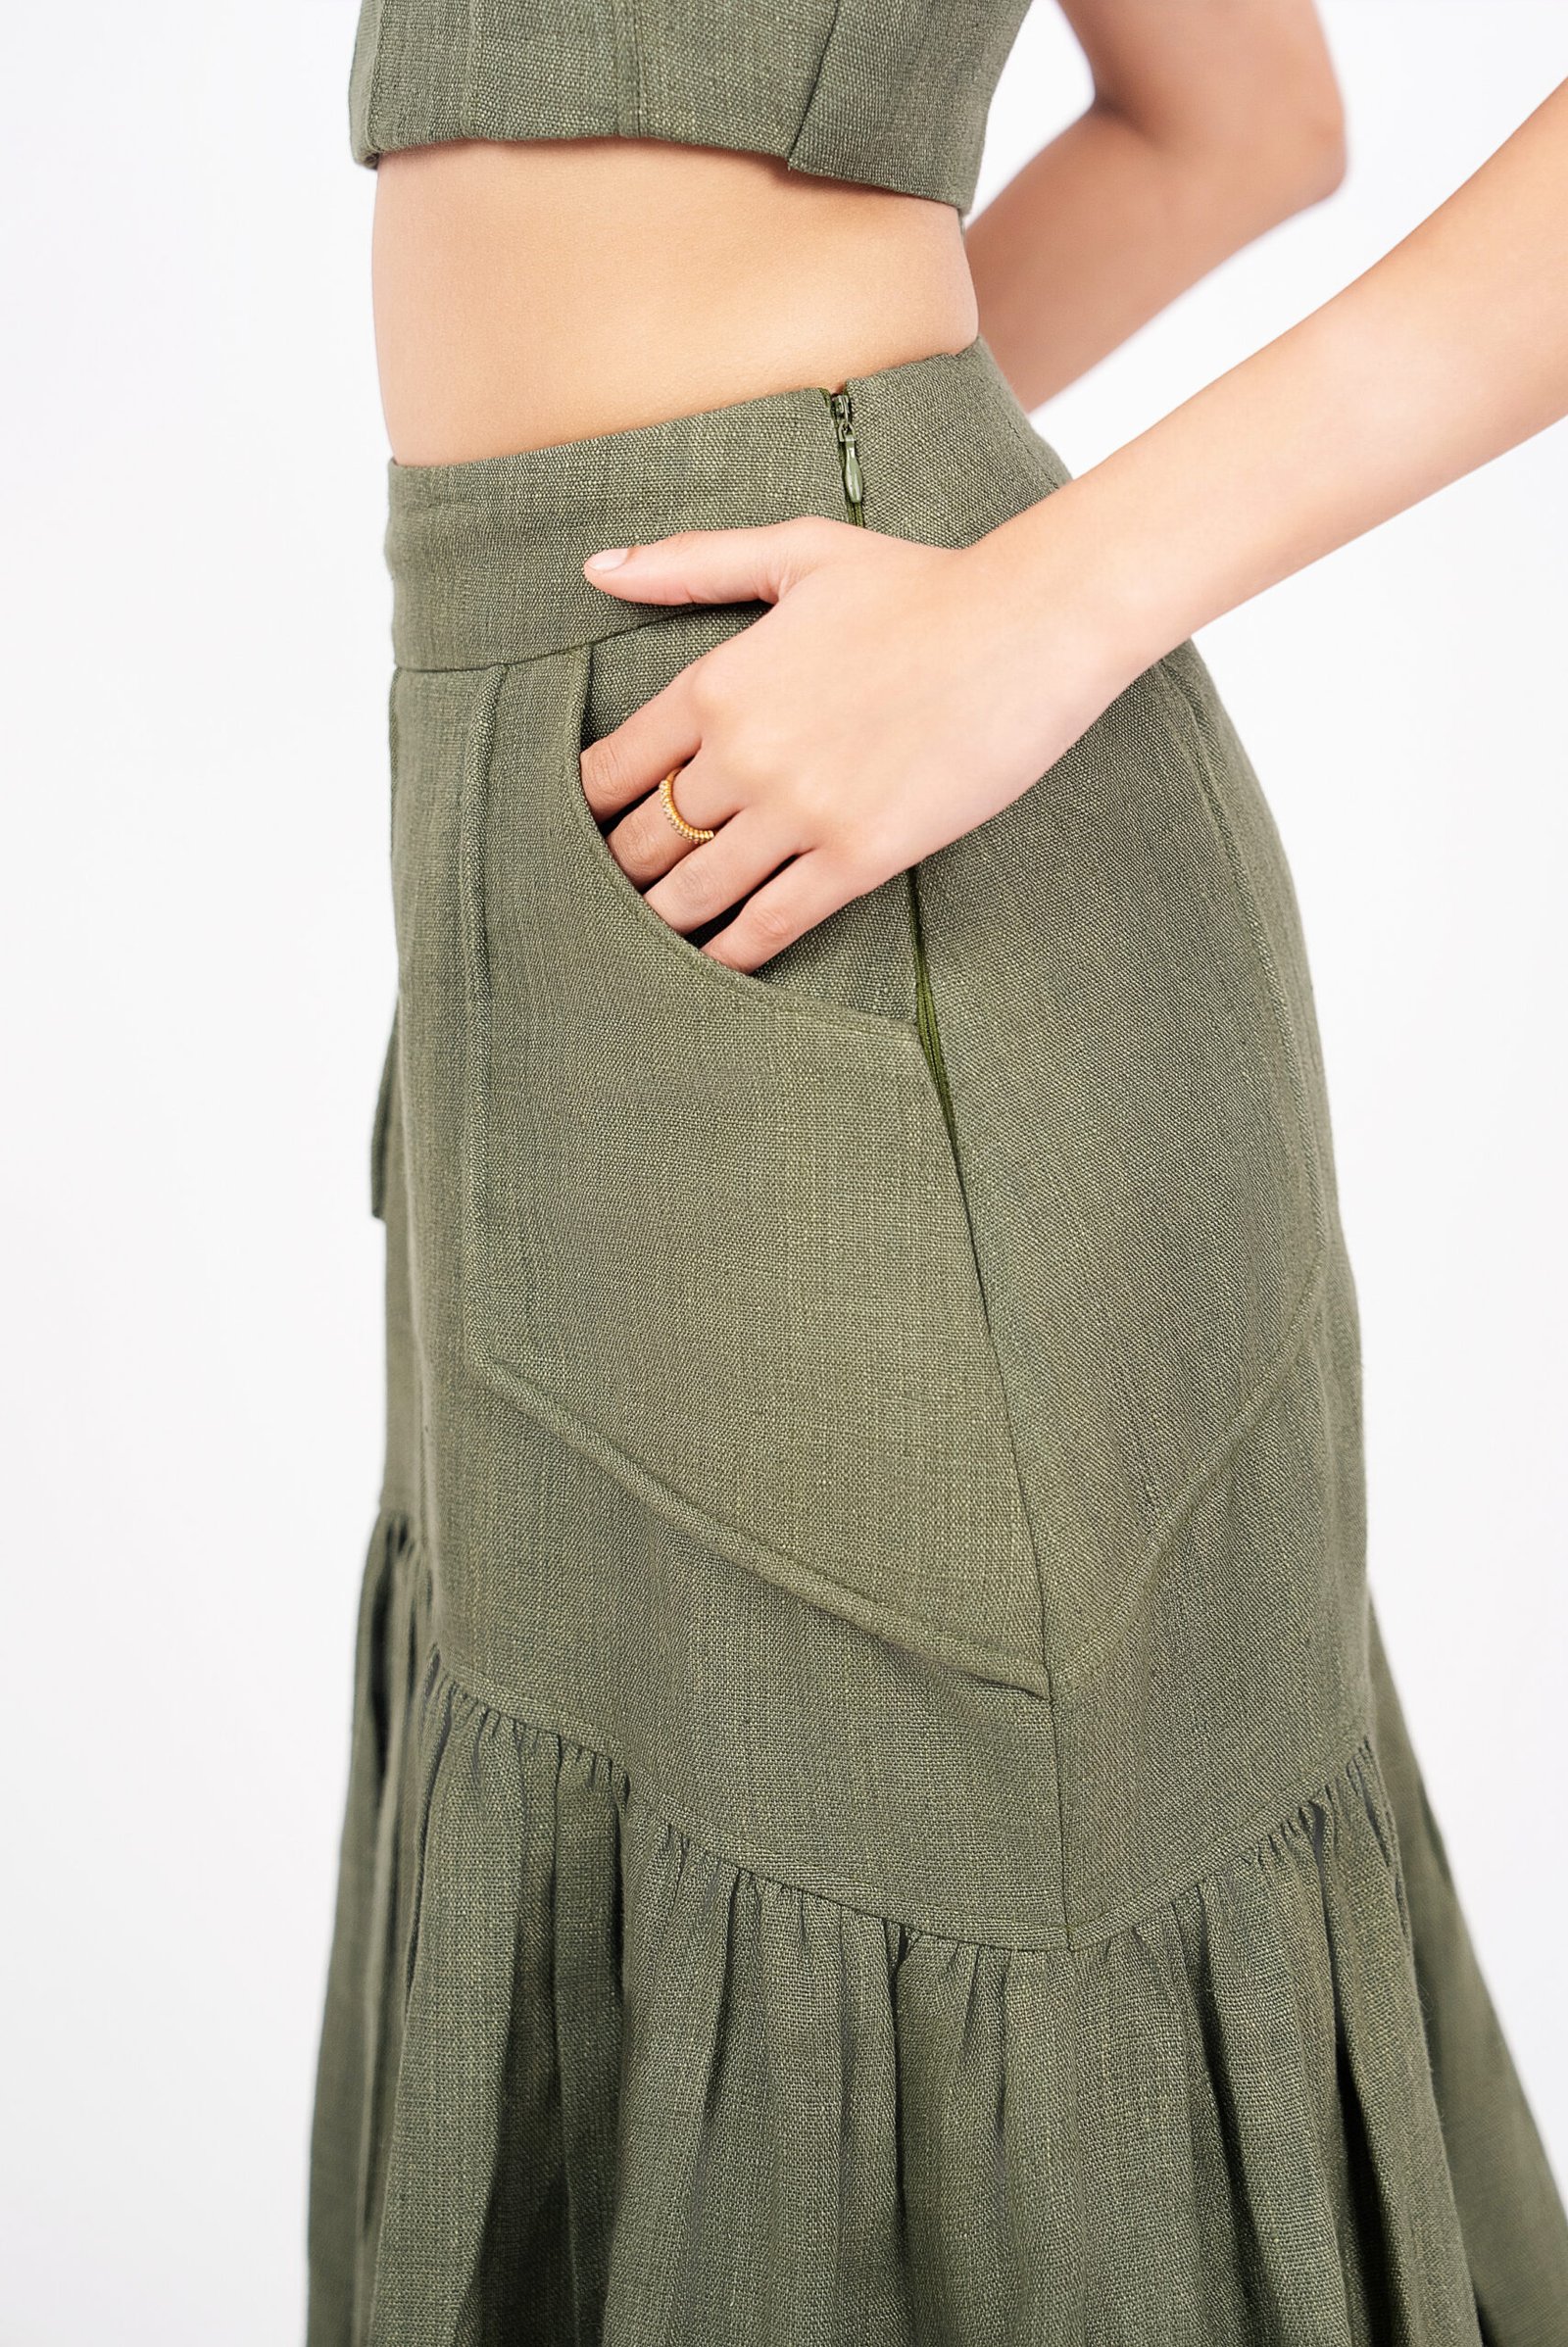 Premium Linen Gathered Long Skirt with Pipin Detailed - Fifth Object